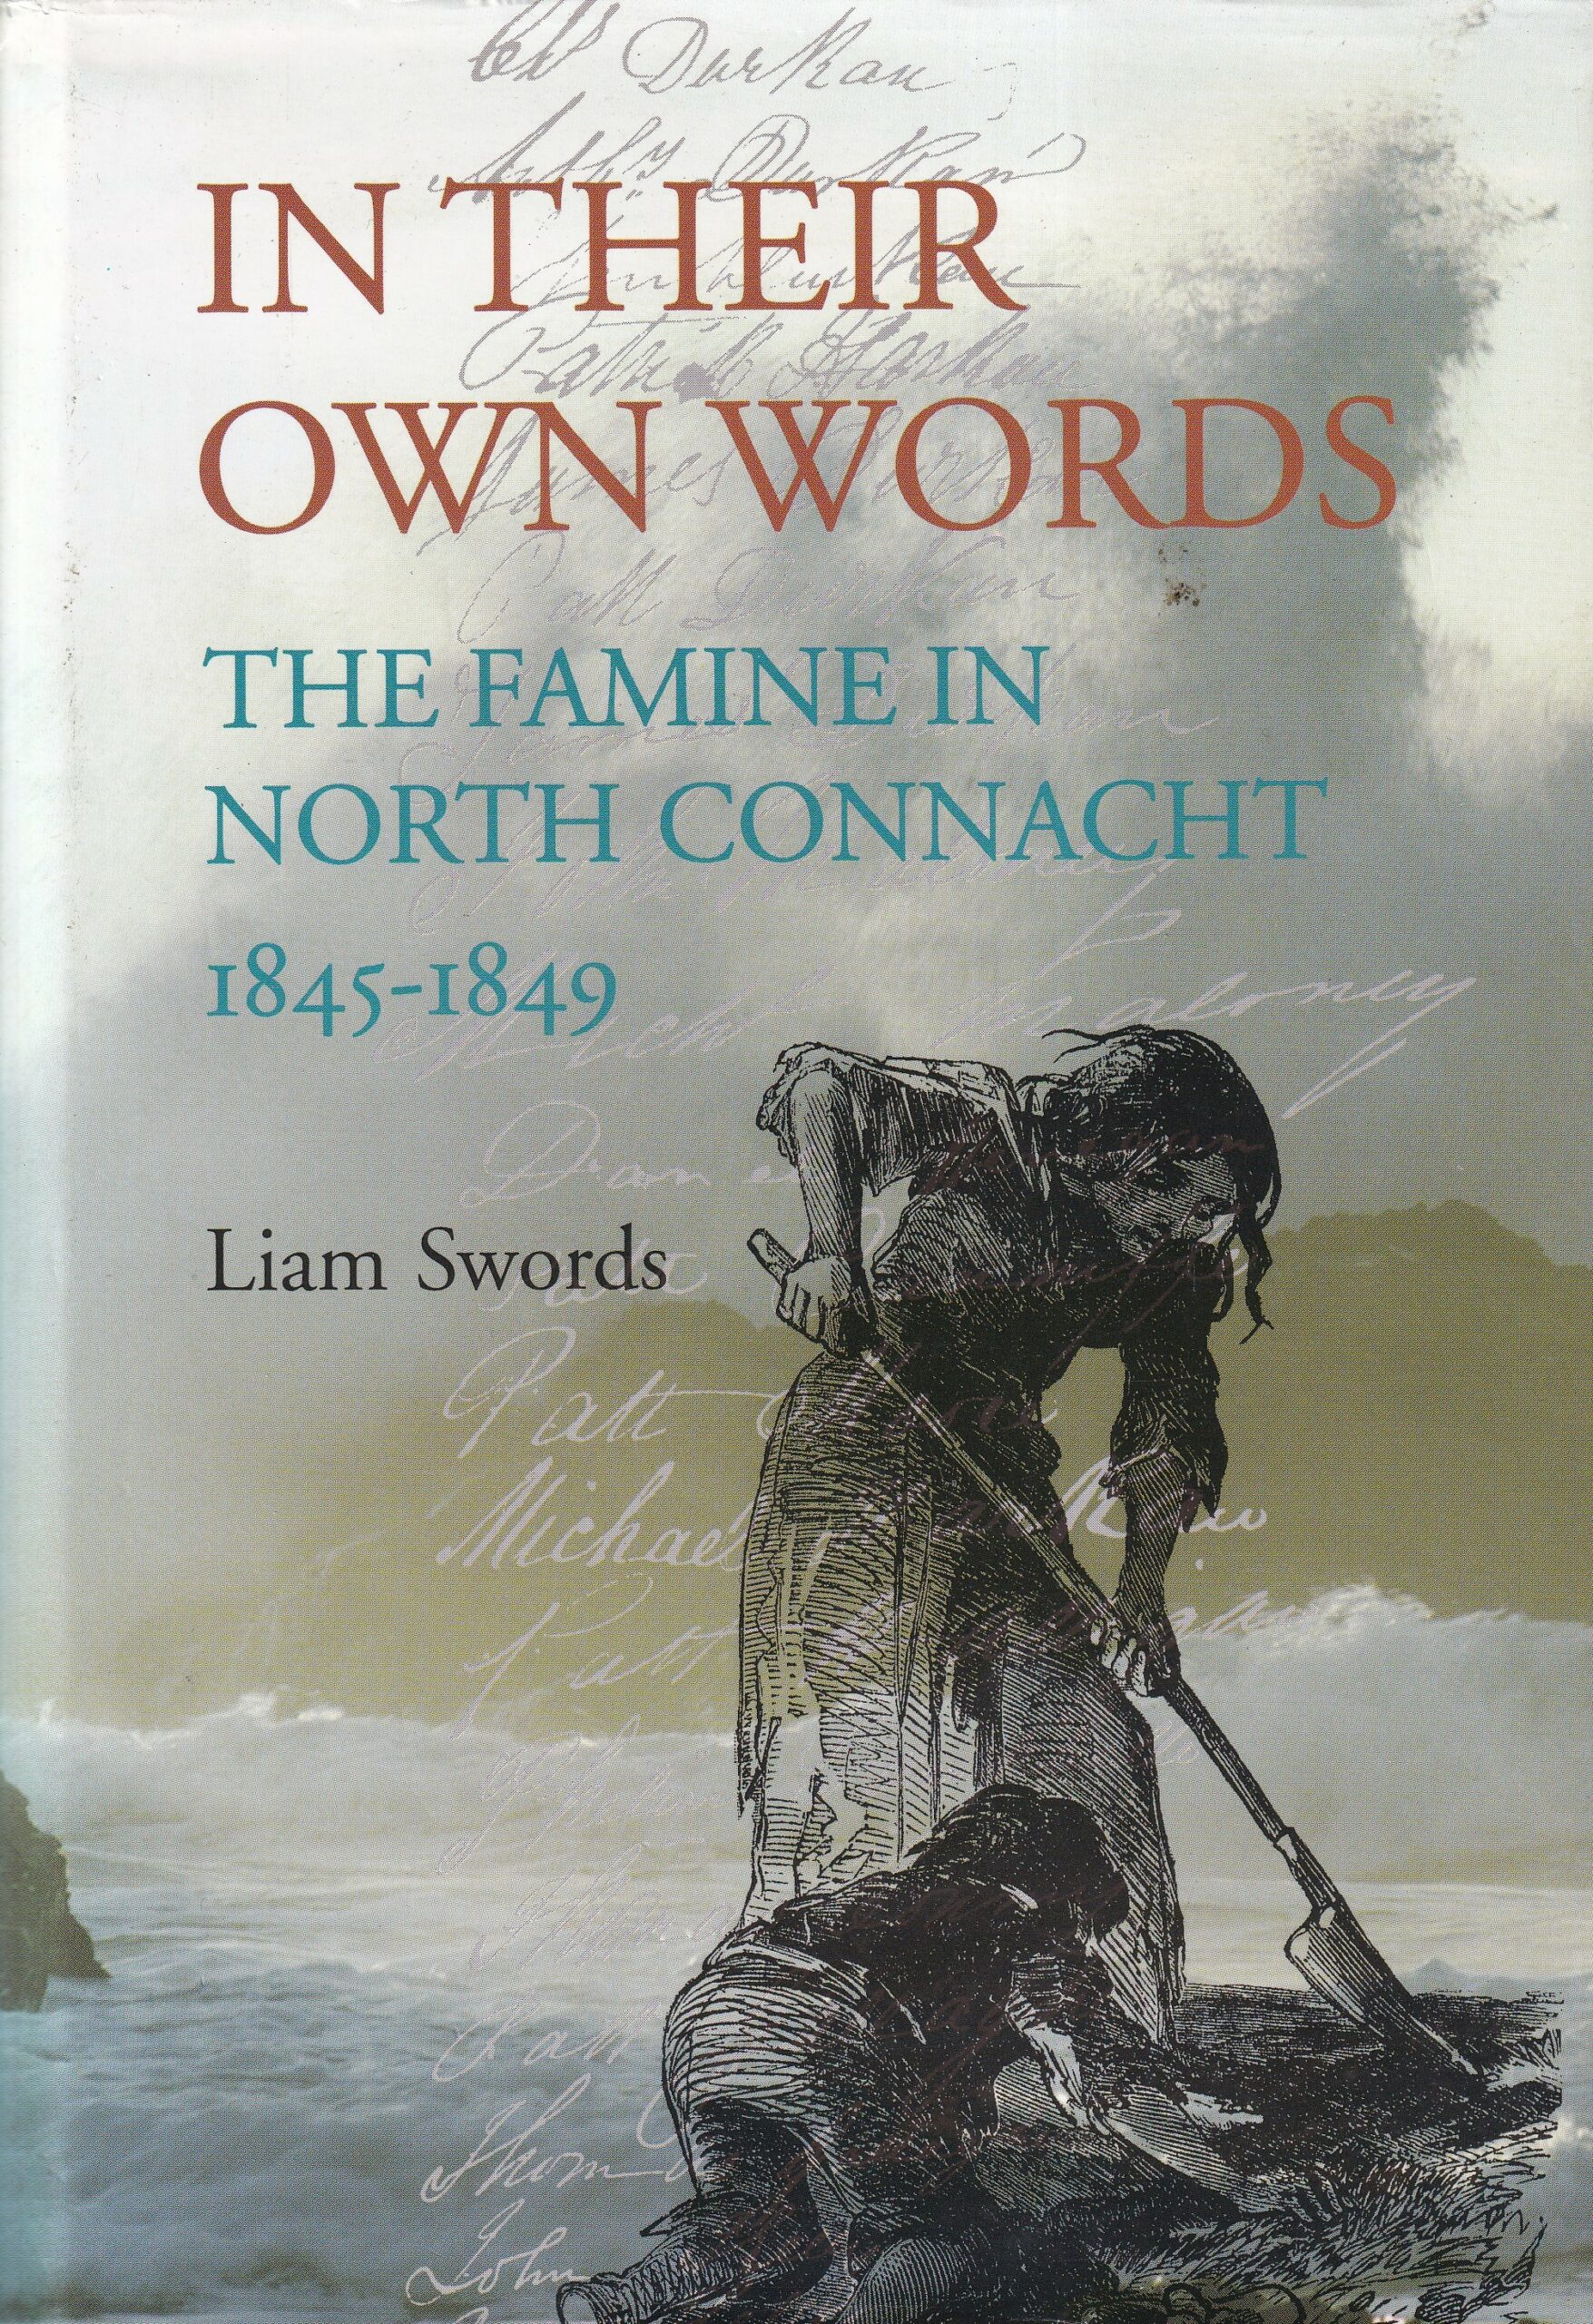 In Their Own Words: The Famine in North Connacht 1845-1849 by Liam Swords